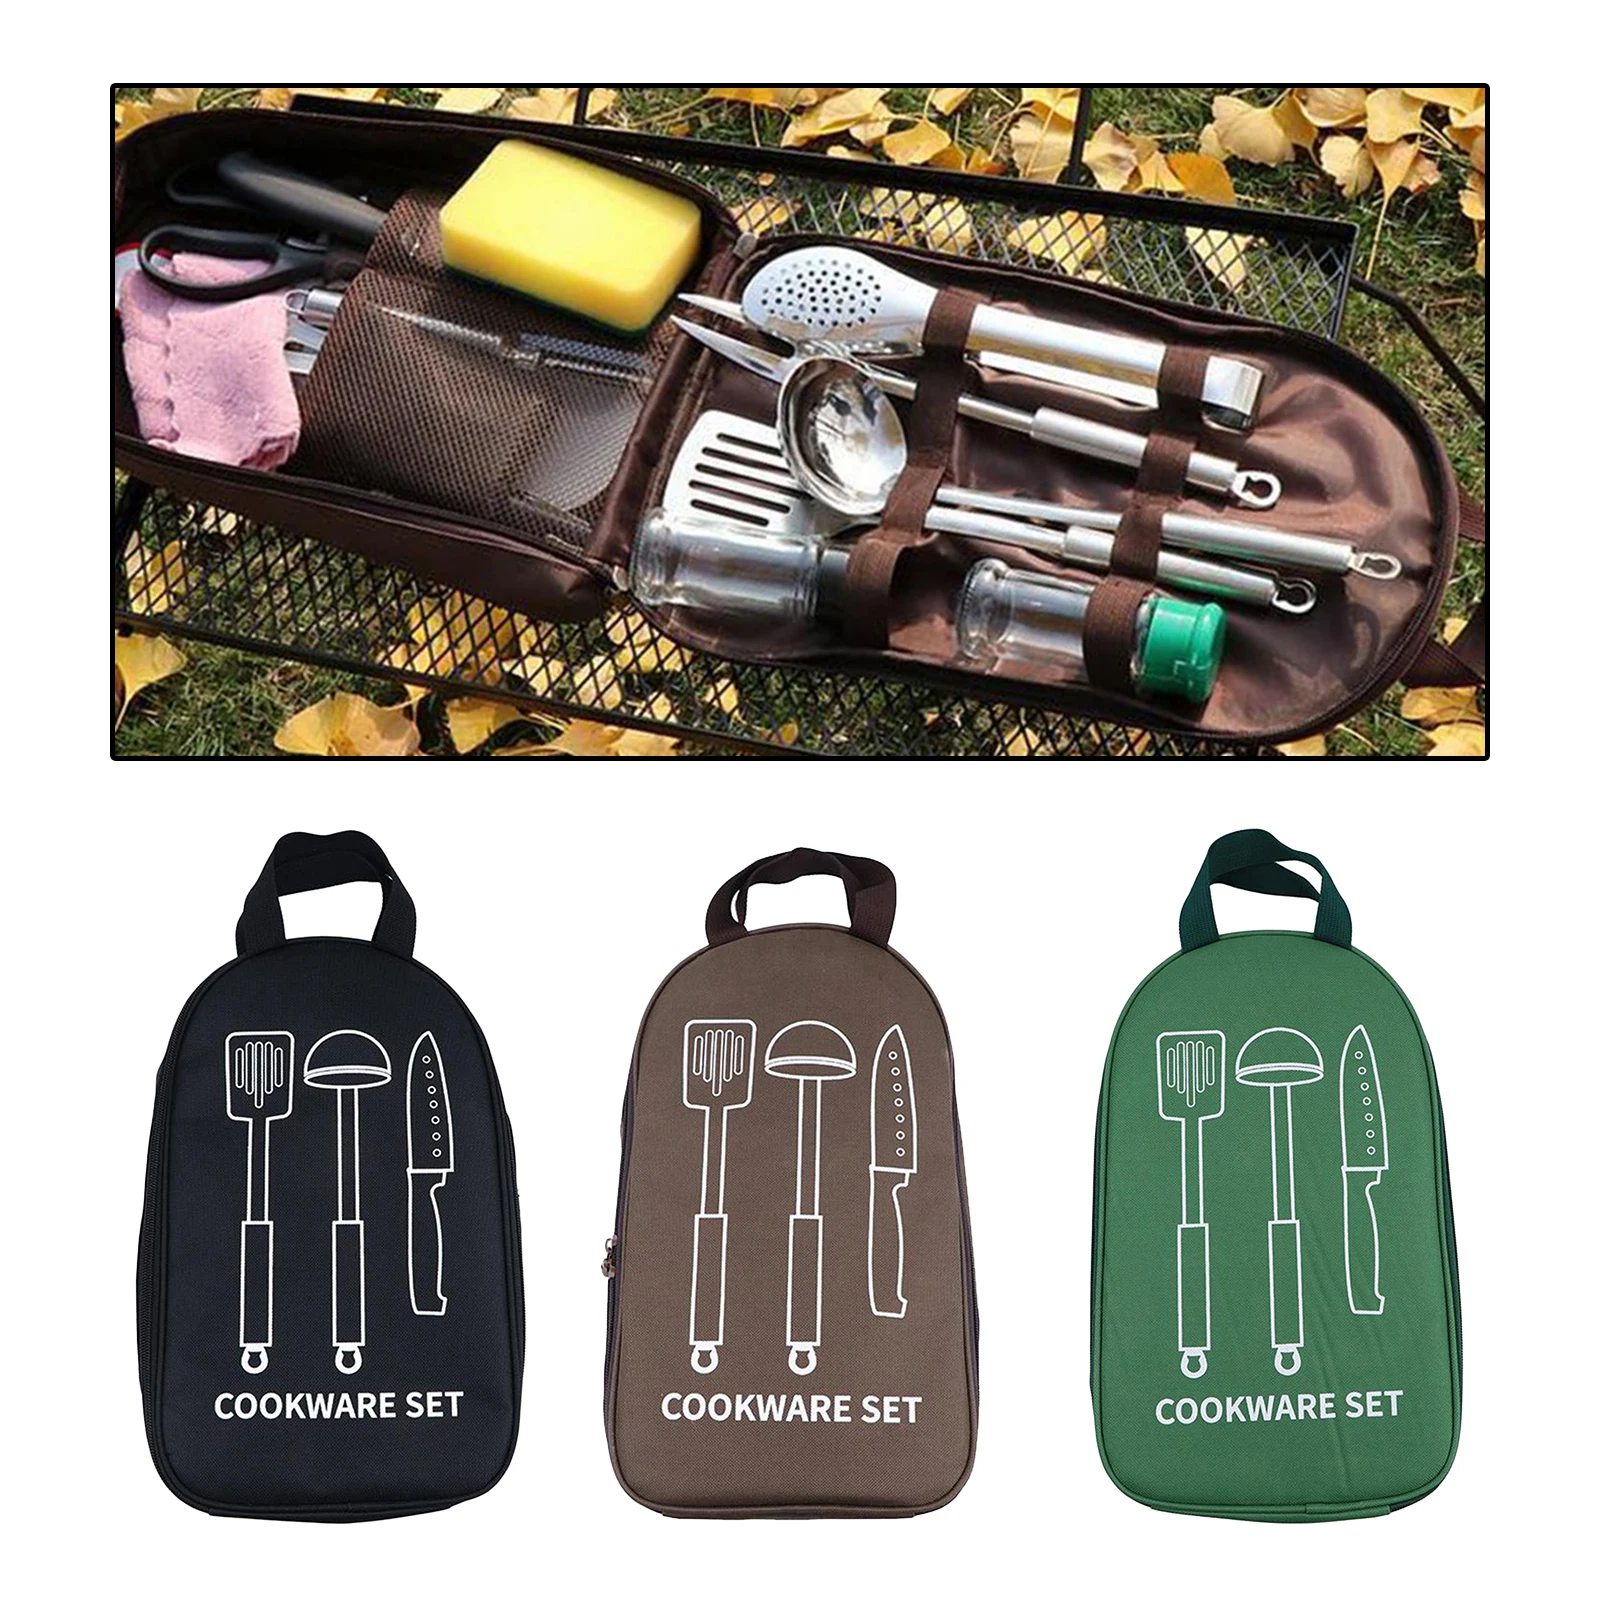 Camping Utensils Organizer Carry Bag Outdoor Cooking Camp Picnic 18-Piece Travel Cookware Set Compact Portable Bag Storage Pouch